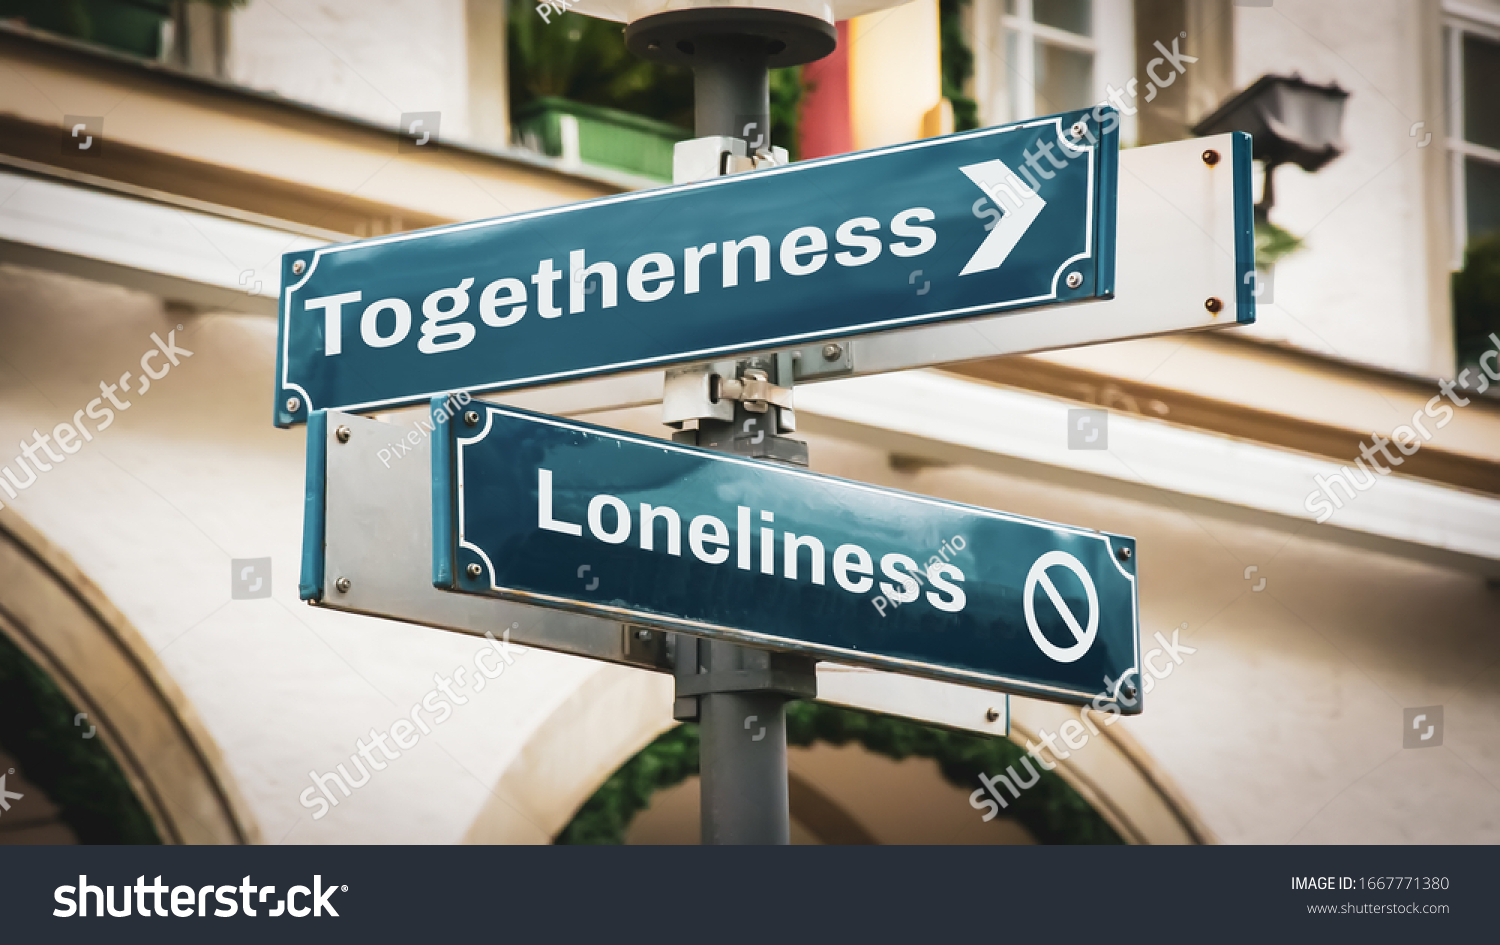 Street Sign the Direction Way to Togetherness versus Loneliness #1667771380